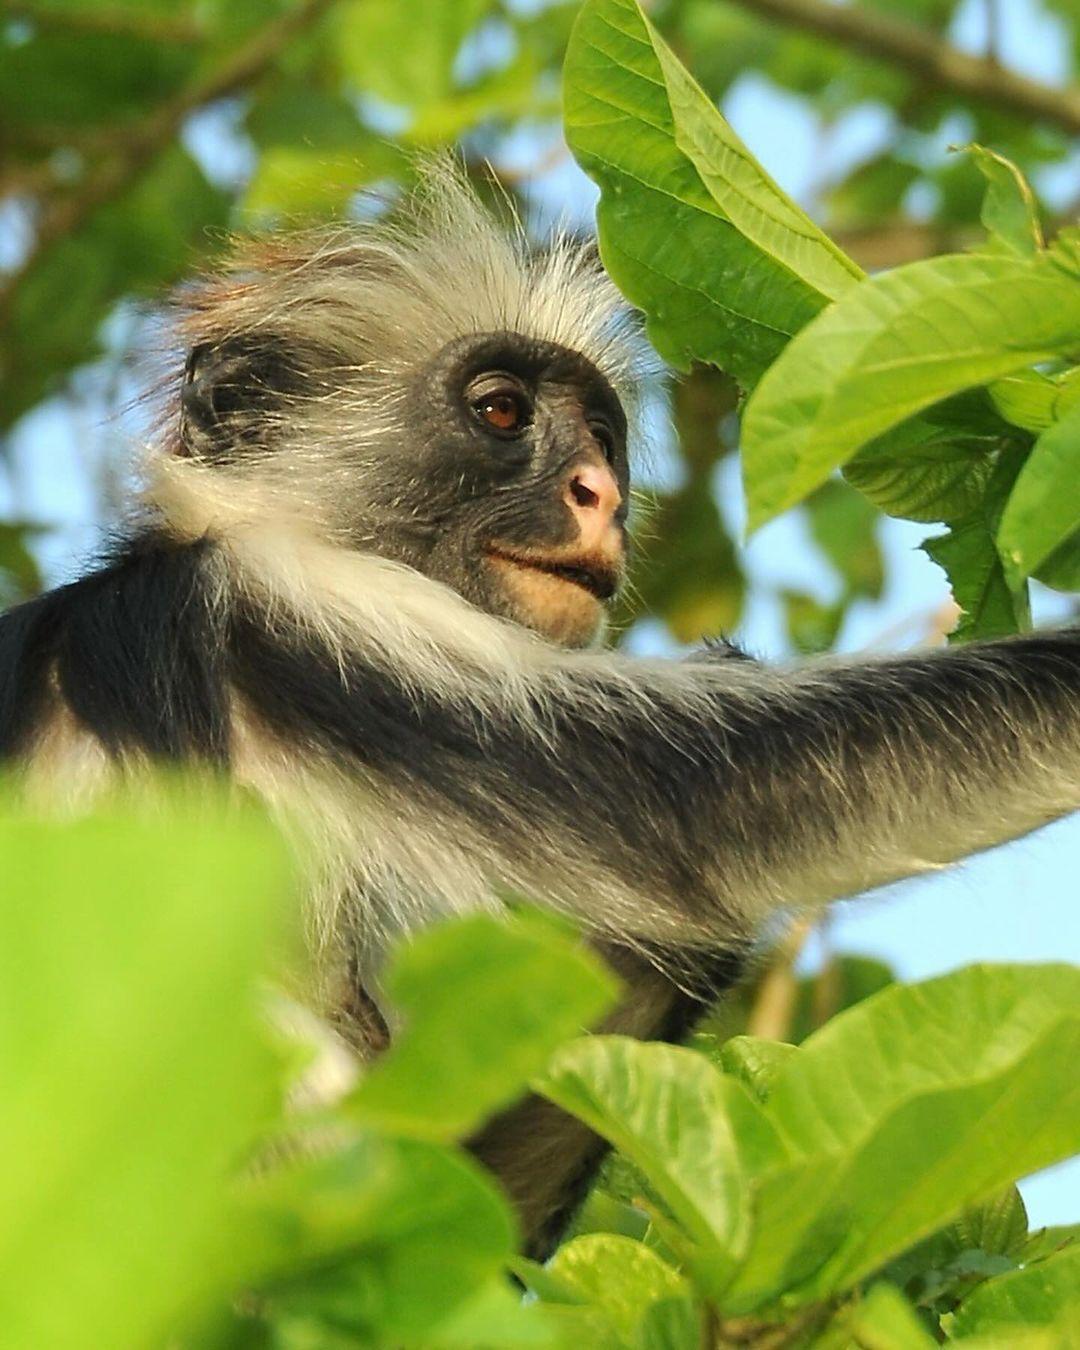 A new protected area has been established to safeguard the Endangered Zanzibar Red Colobus. Conservationists have worked for 7+ years on the archipelago of Zanzibar to make the Kidikotundu-Nongwe-Vundwe Reserve a reality. This protected area now protects roughly 500 individuals of this Endangered primate - representing over 10% of their entire global population.

Total population surveys over a number of years, assessed the abundance and distribution of the Zanzibar Red Colobus. This allowed conservationists to understand the need for additional protected areas and their locations. In addition to protecting primates, this reserve is home to the Critically Endangered Hawksbill Sea Turtle, Endangered Aders’ Duiker, Zanzibar Slender Mongoose, and Rufous Elephant Shrew.

Considered the most threatened group of monkeys across mainland Africa, red colobus are in dire need of conservation action. My organization, Re:wild, has worked with over 160 conservationists to develop a comprehensive Red Colobus Conservation Action Plan that addresses the most urgent needs for red colobus to ensure their survival. We are dedicated to preserving these primates and their forest habitats, helping shine a spotlight on efforts to protect them.

The creation of Kidikotundu-Nongwe-Vundwe Reserve was funded in part by @rainforesttrust, Margot Marsh, @thewcs, and @rewild.

Photo credit: Tim Davenport